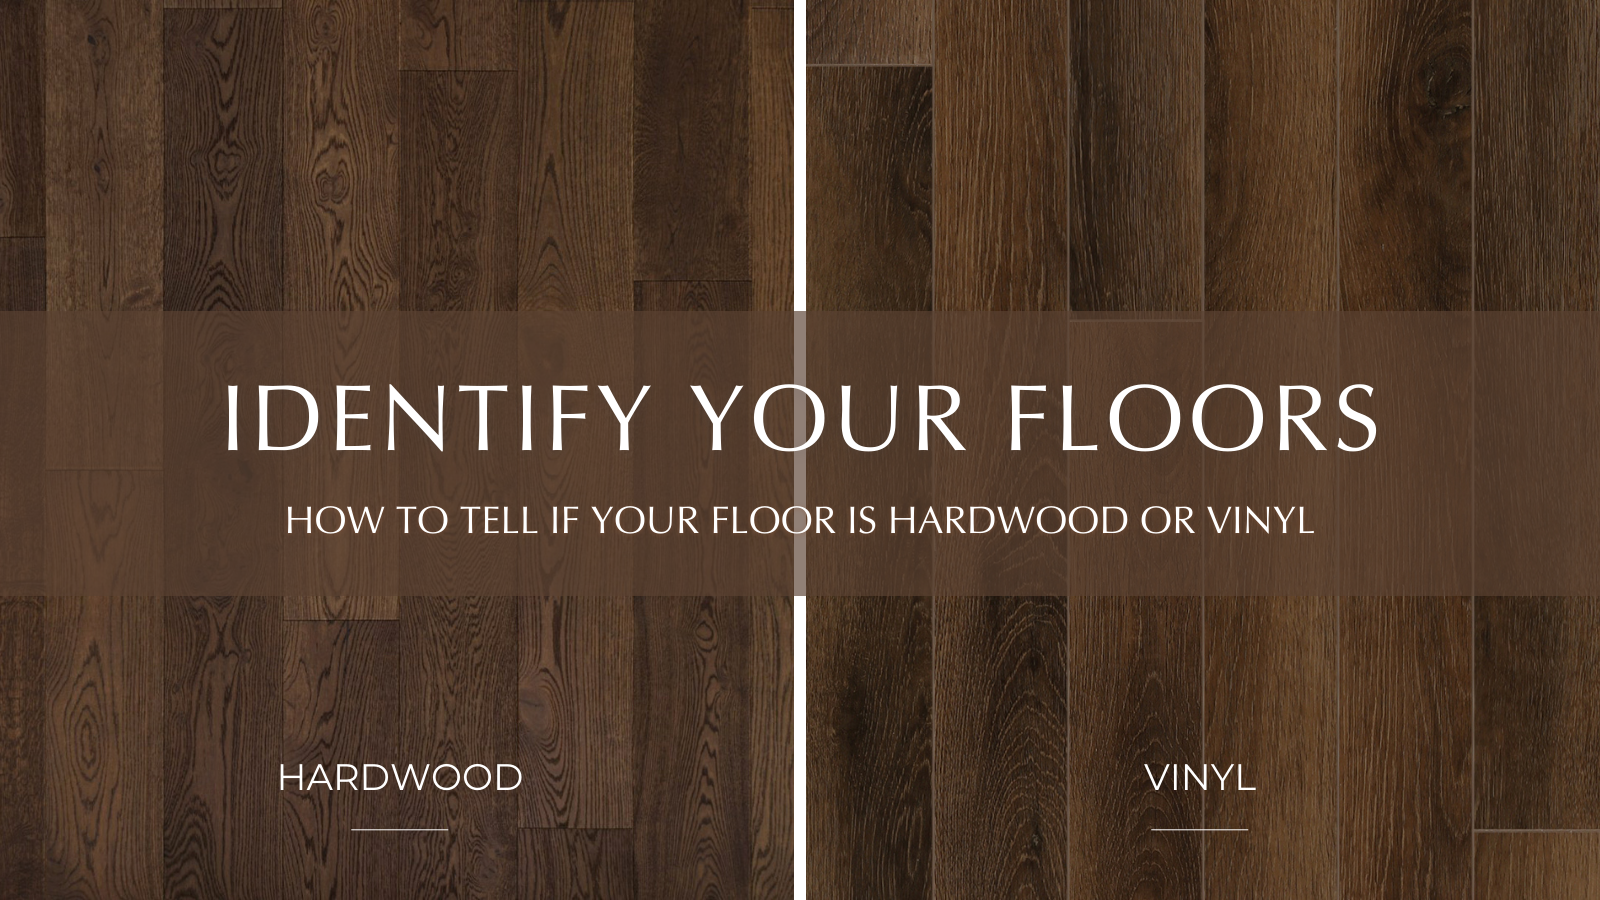 Linoleum vs. Laminate: What's the Difference?